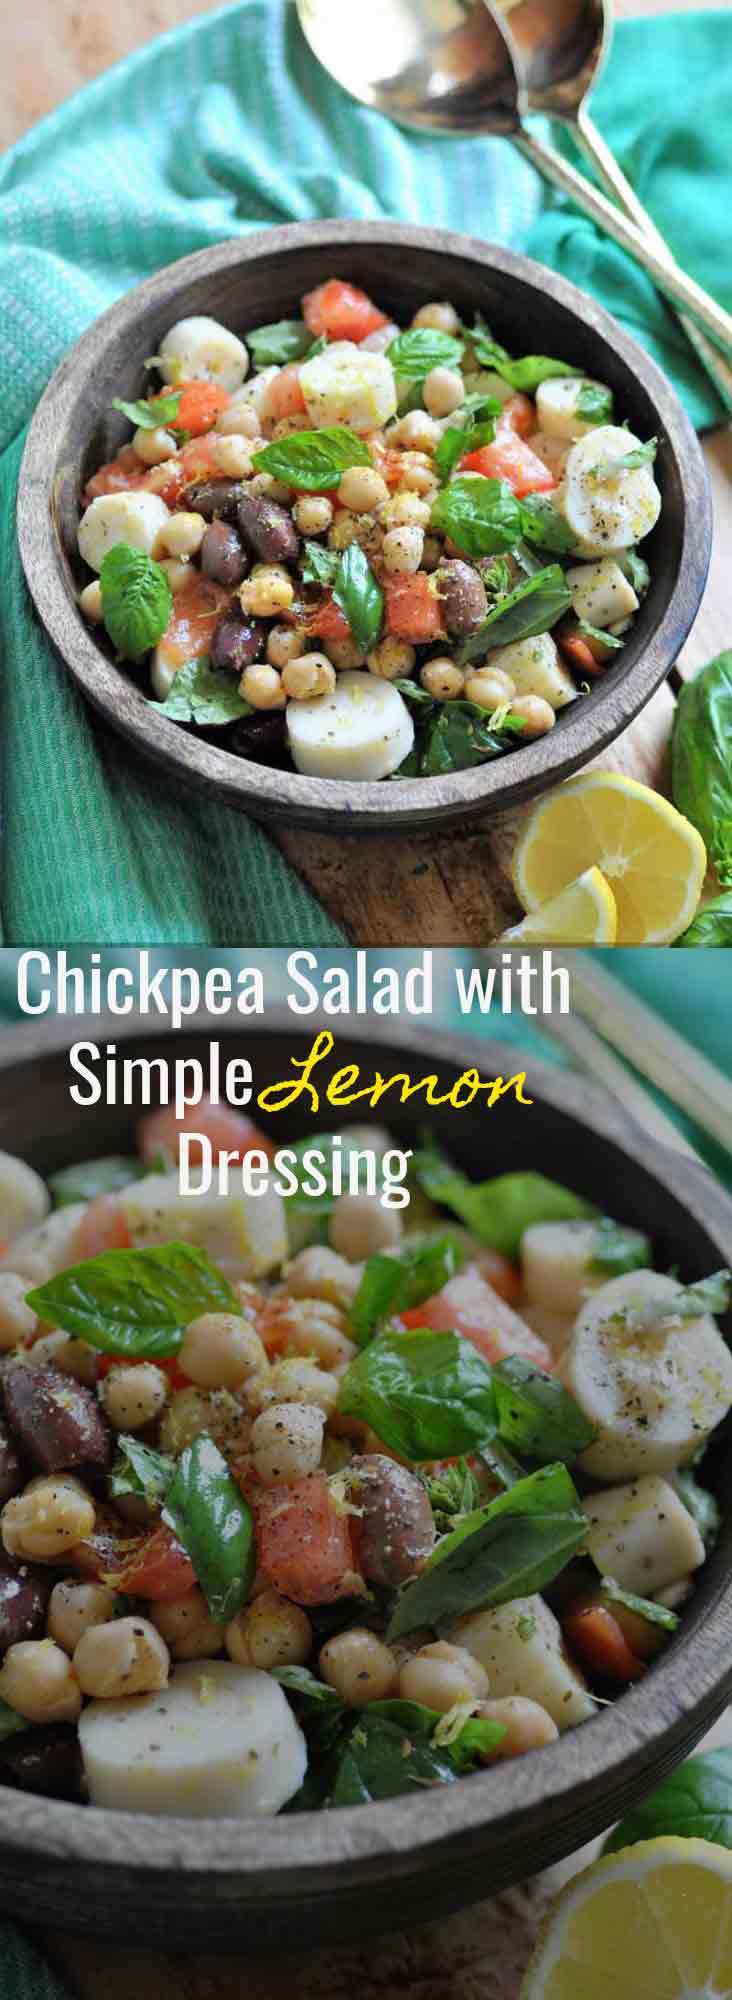 An easy and healthy chickpea salad with lemon dressing. The perfect quick dinner recipe.